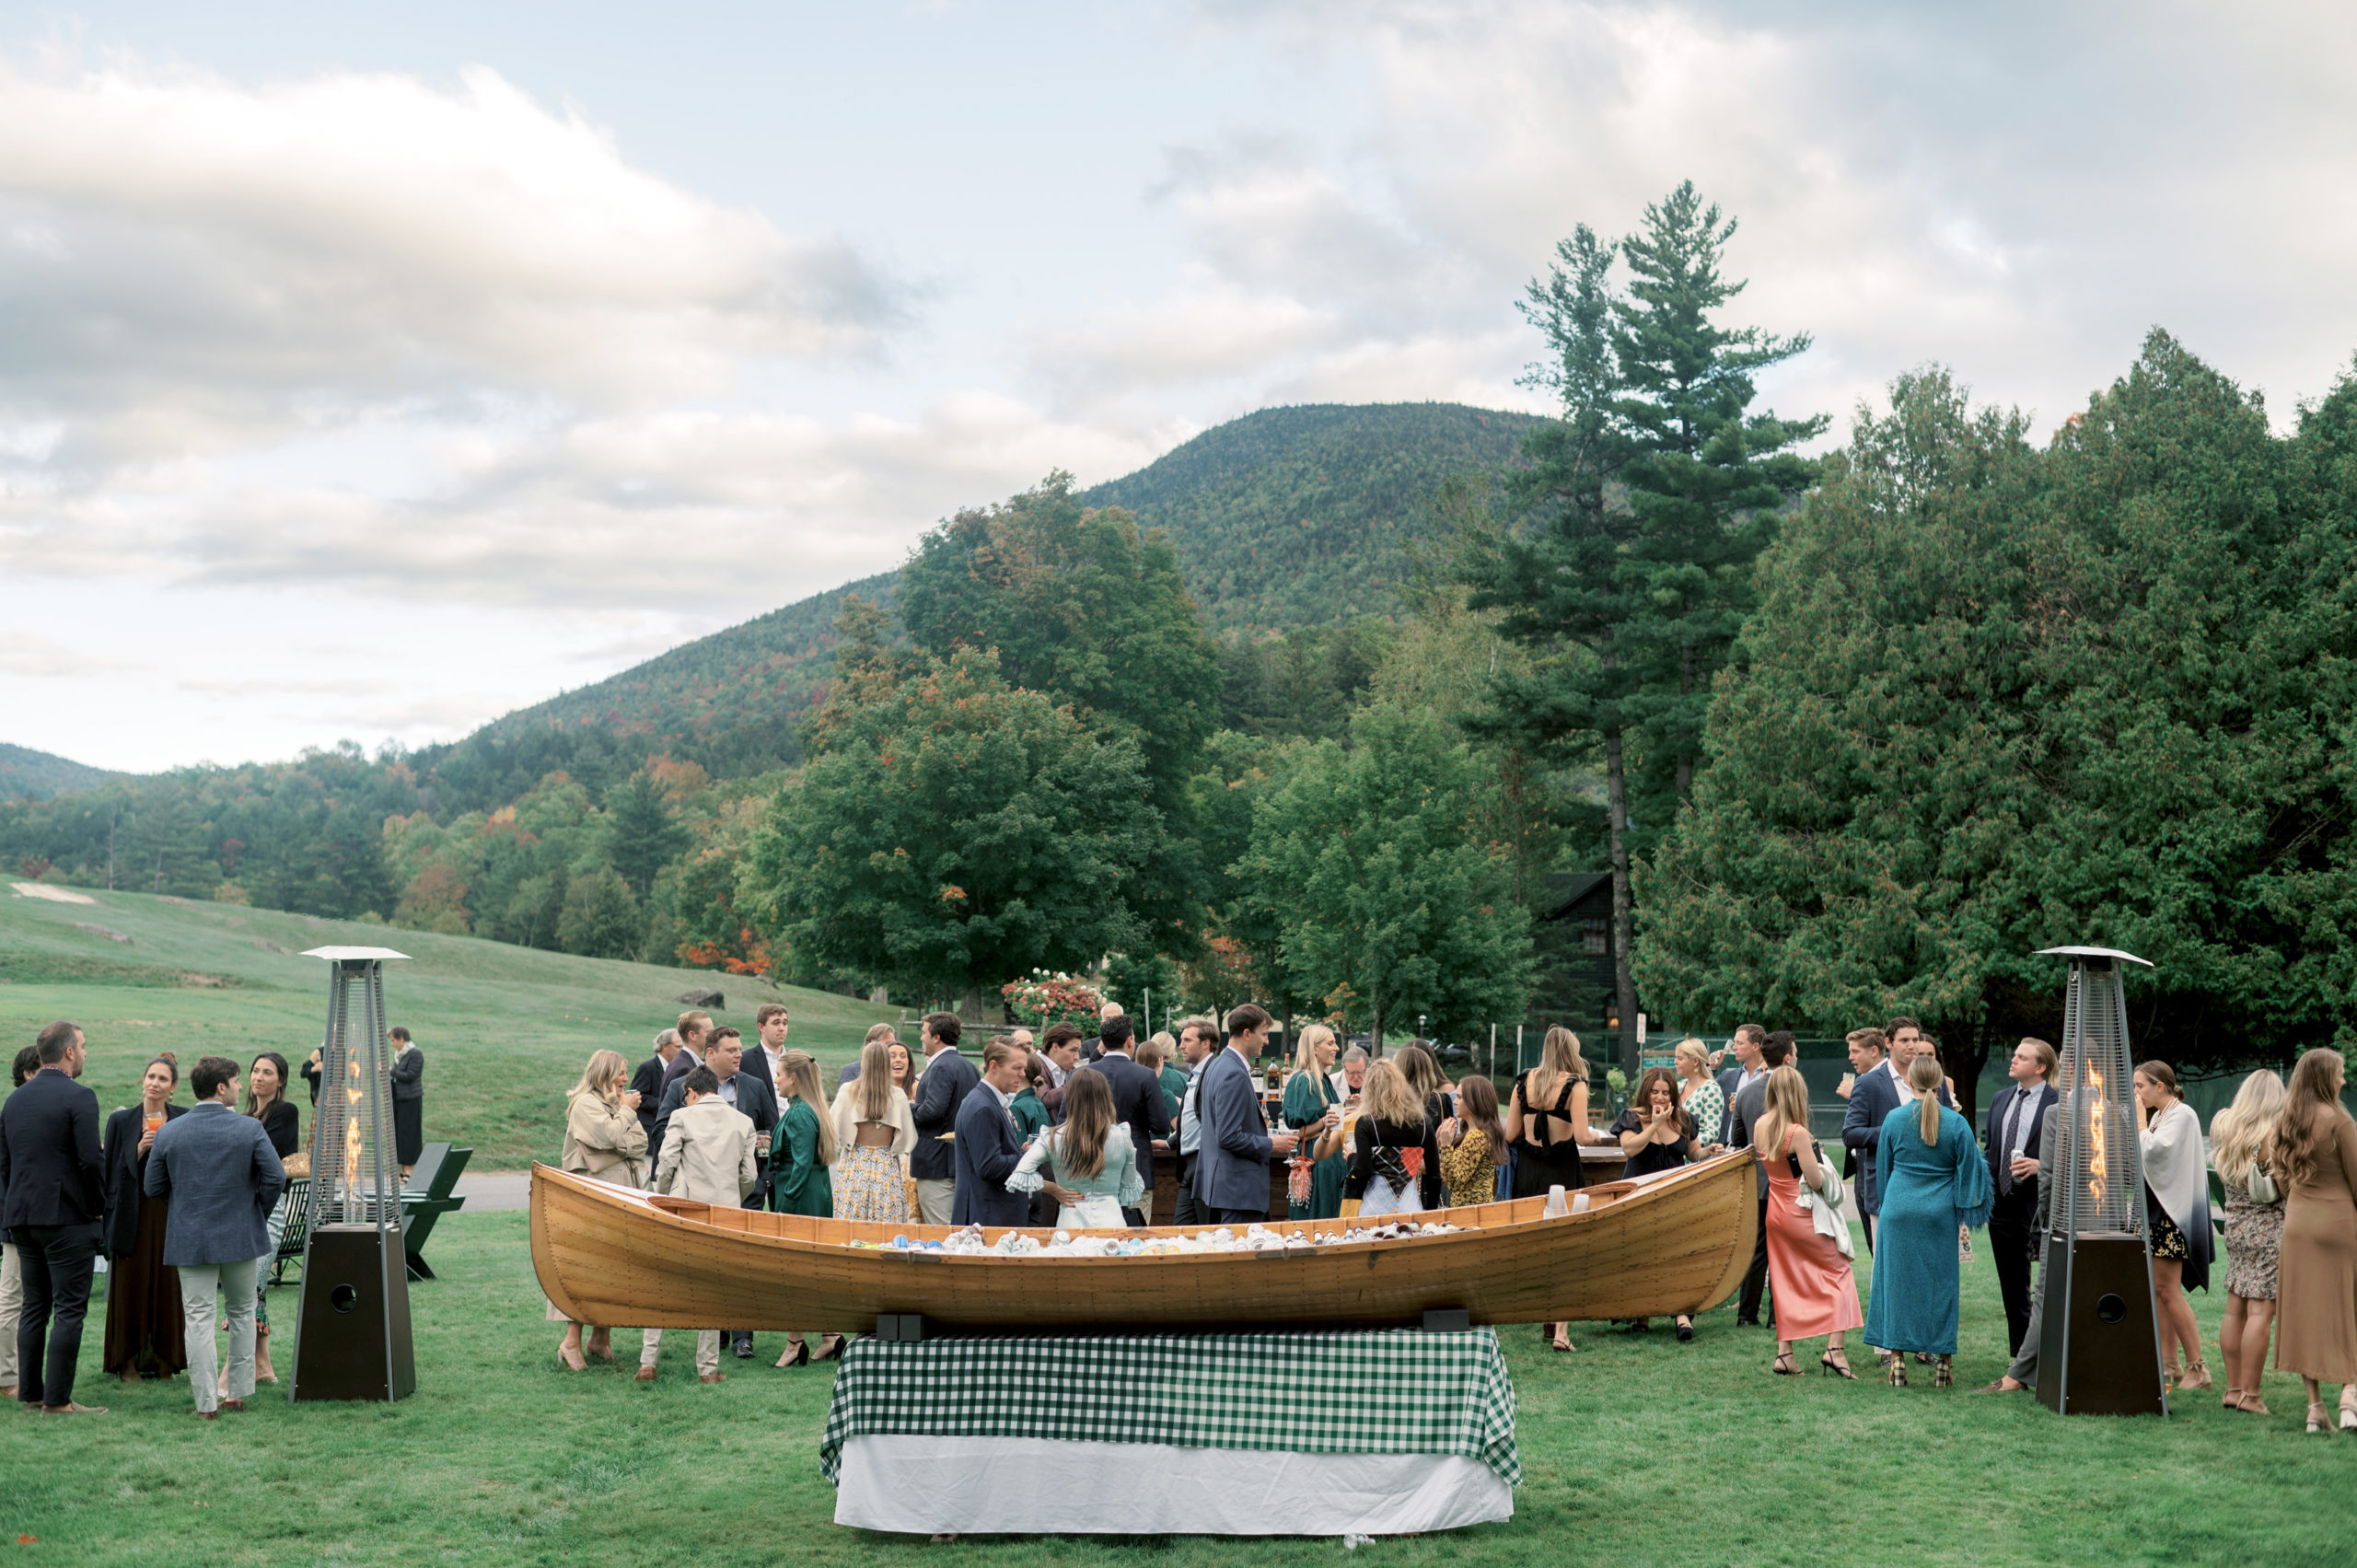 The wedding guests gather outdoors for a cocktail at The Ausable Club. Upstate NY wedding venues image by Jenny Fu Studio